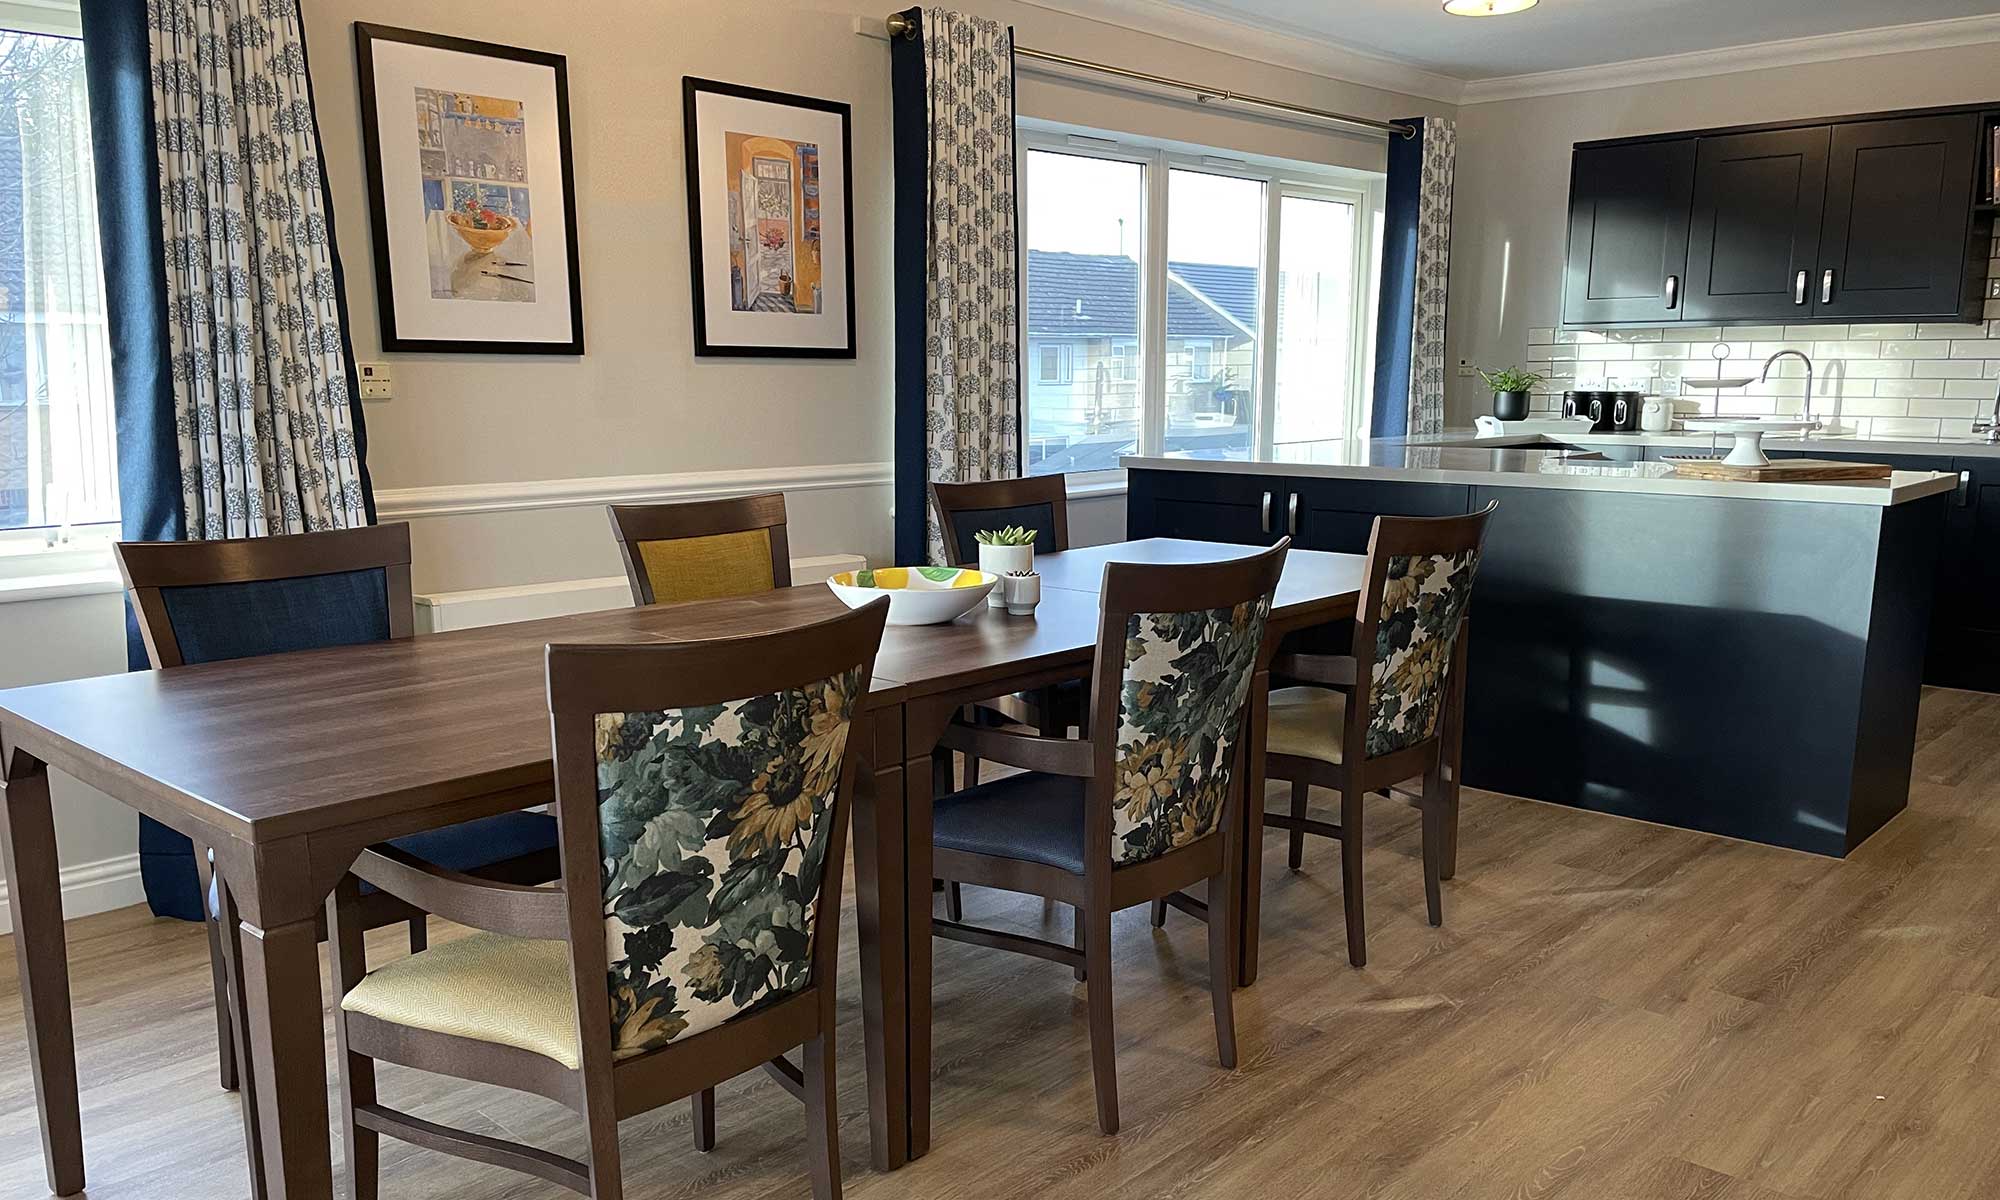 Dining room at Amberley Court with the Addison dining table and Sienna dining chairs